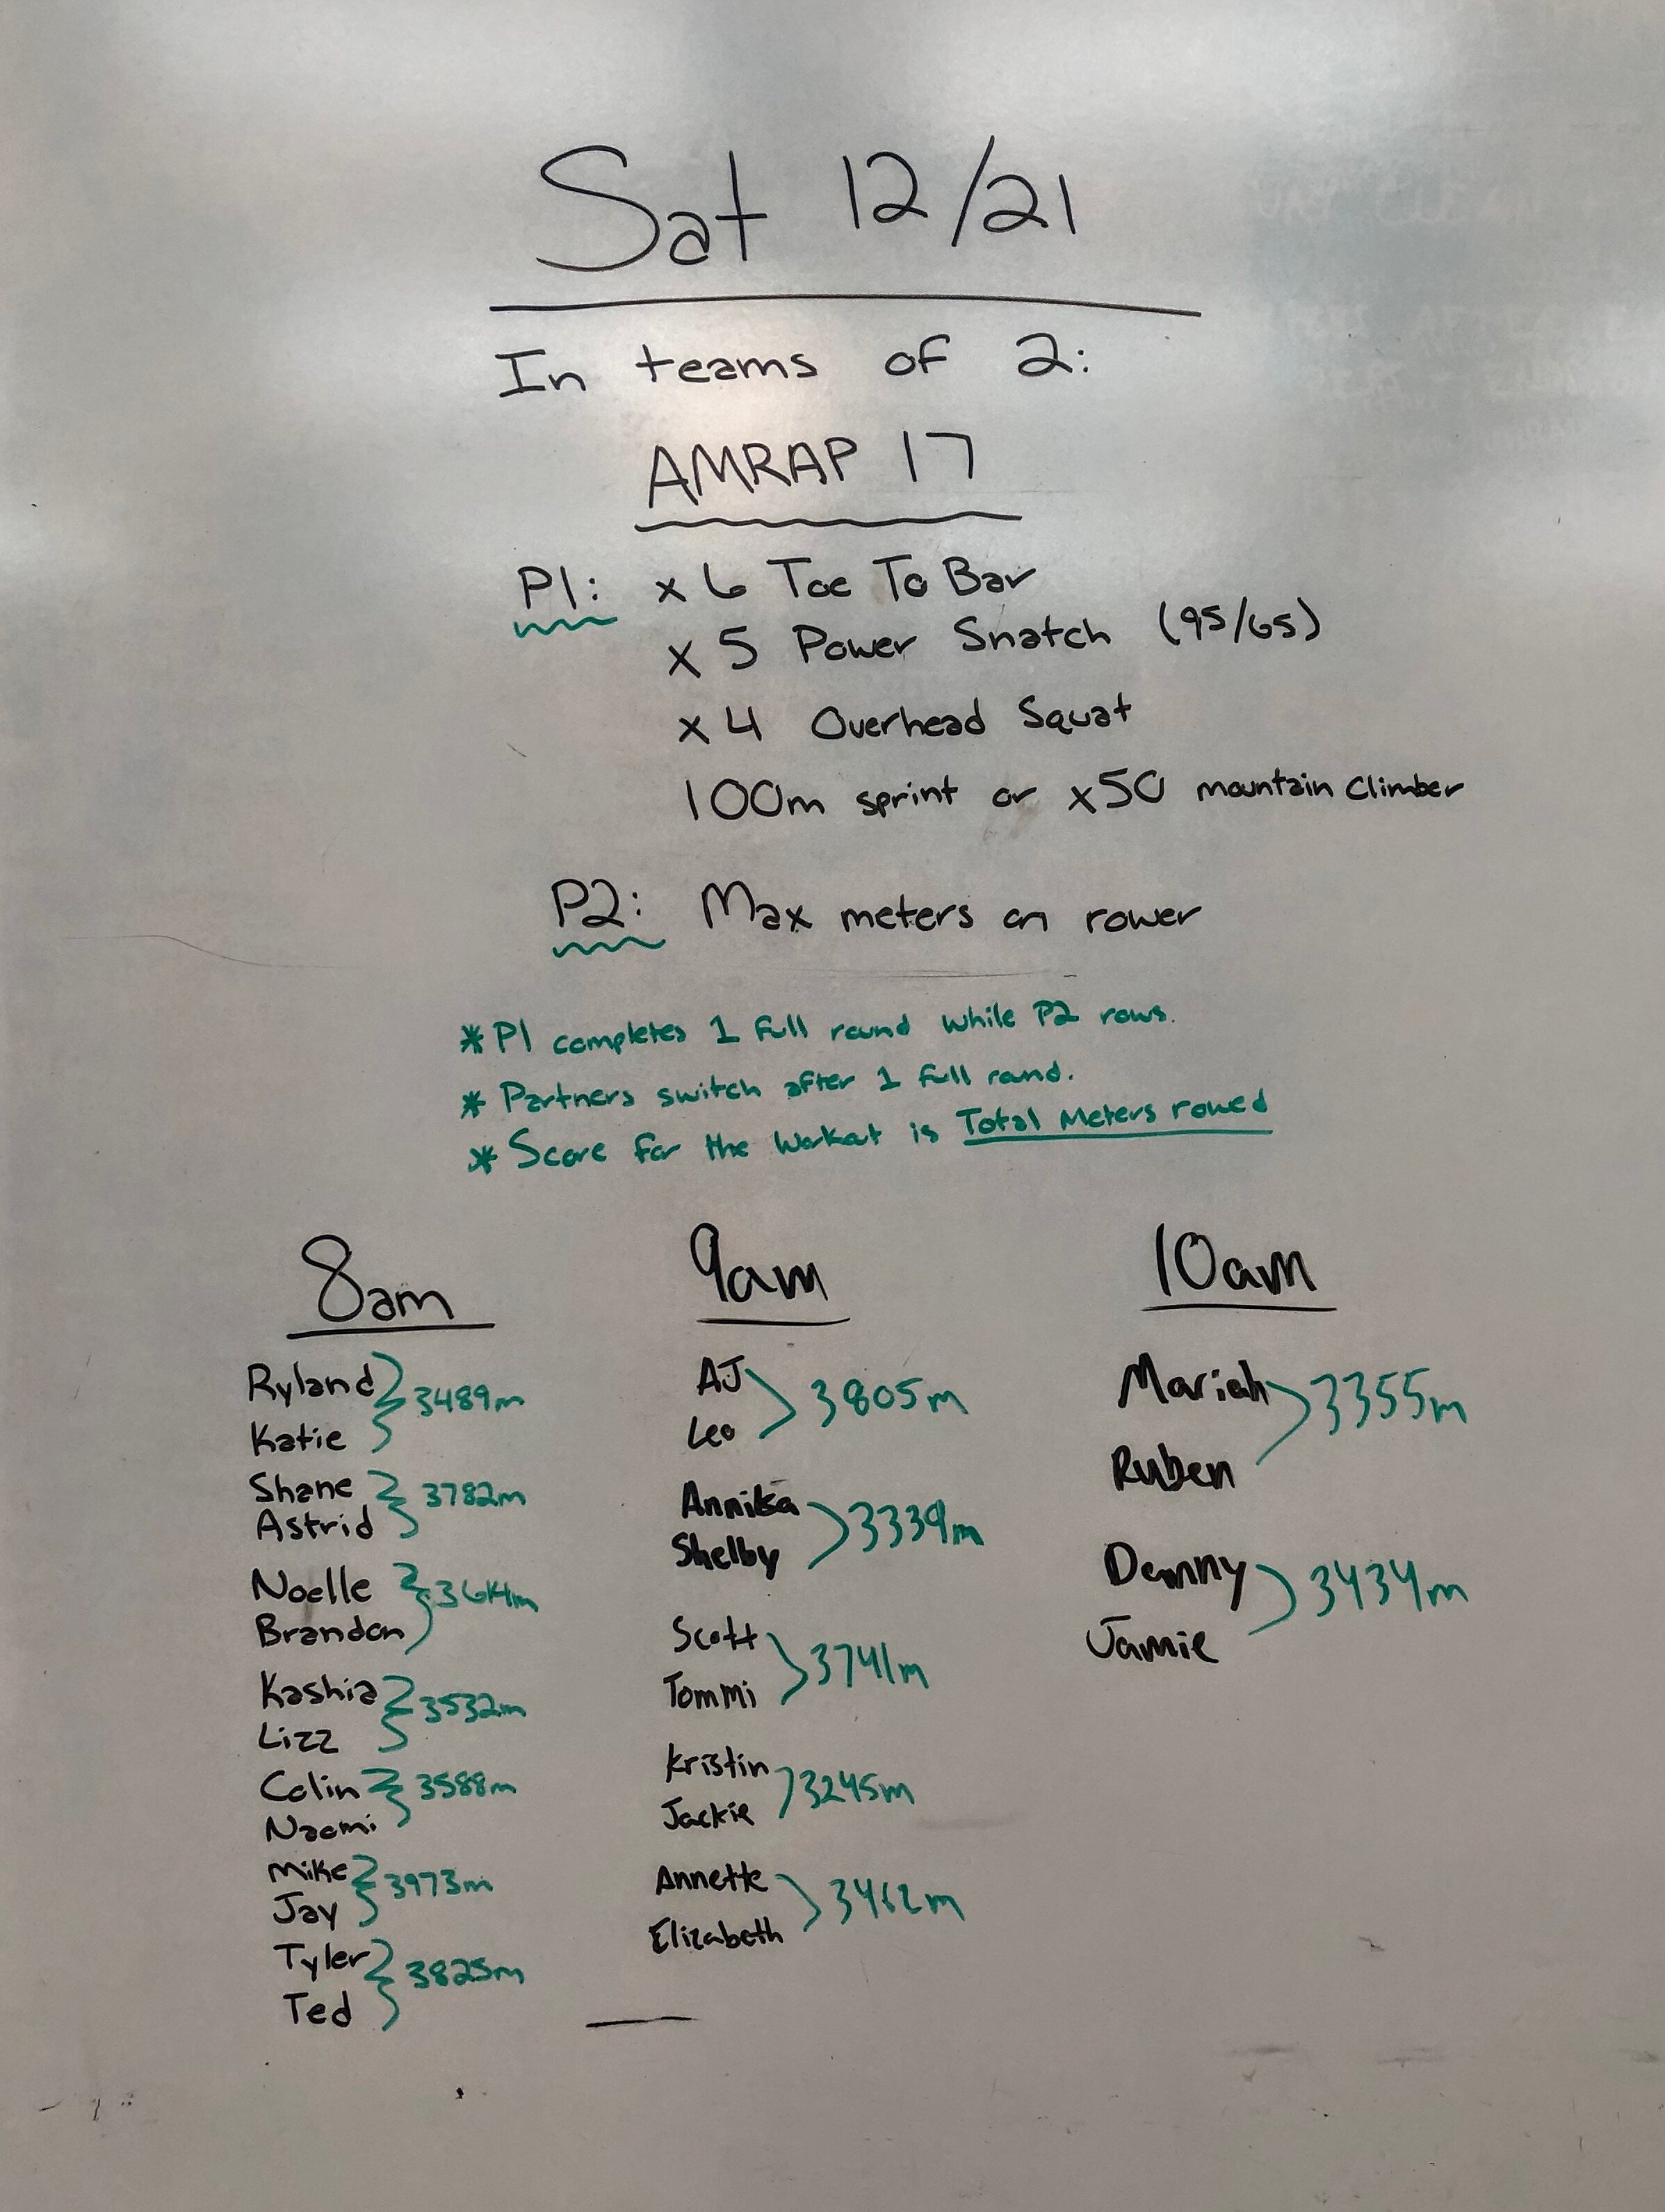 Saturday's Are For Partner WODs 20191221 — CrossFit Flagstaff